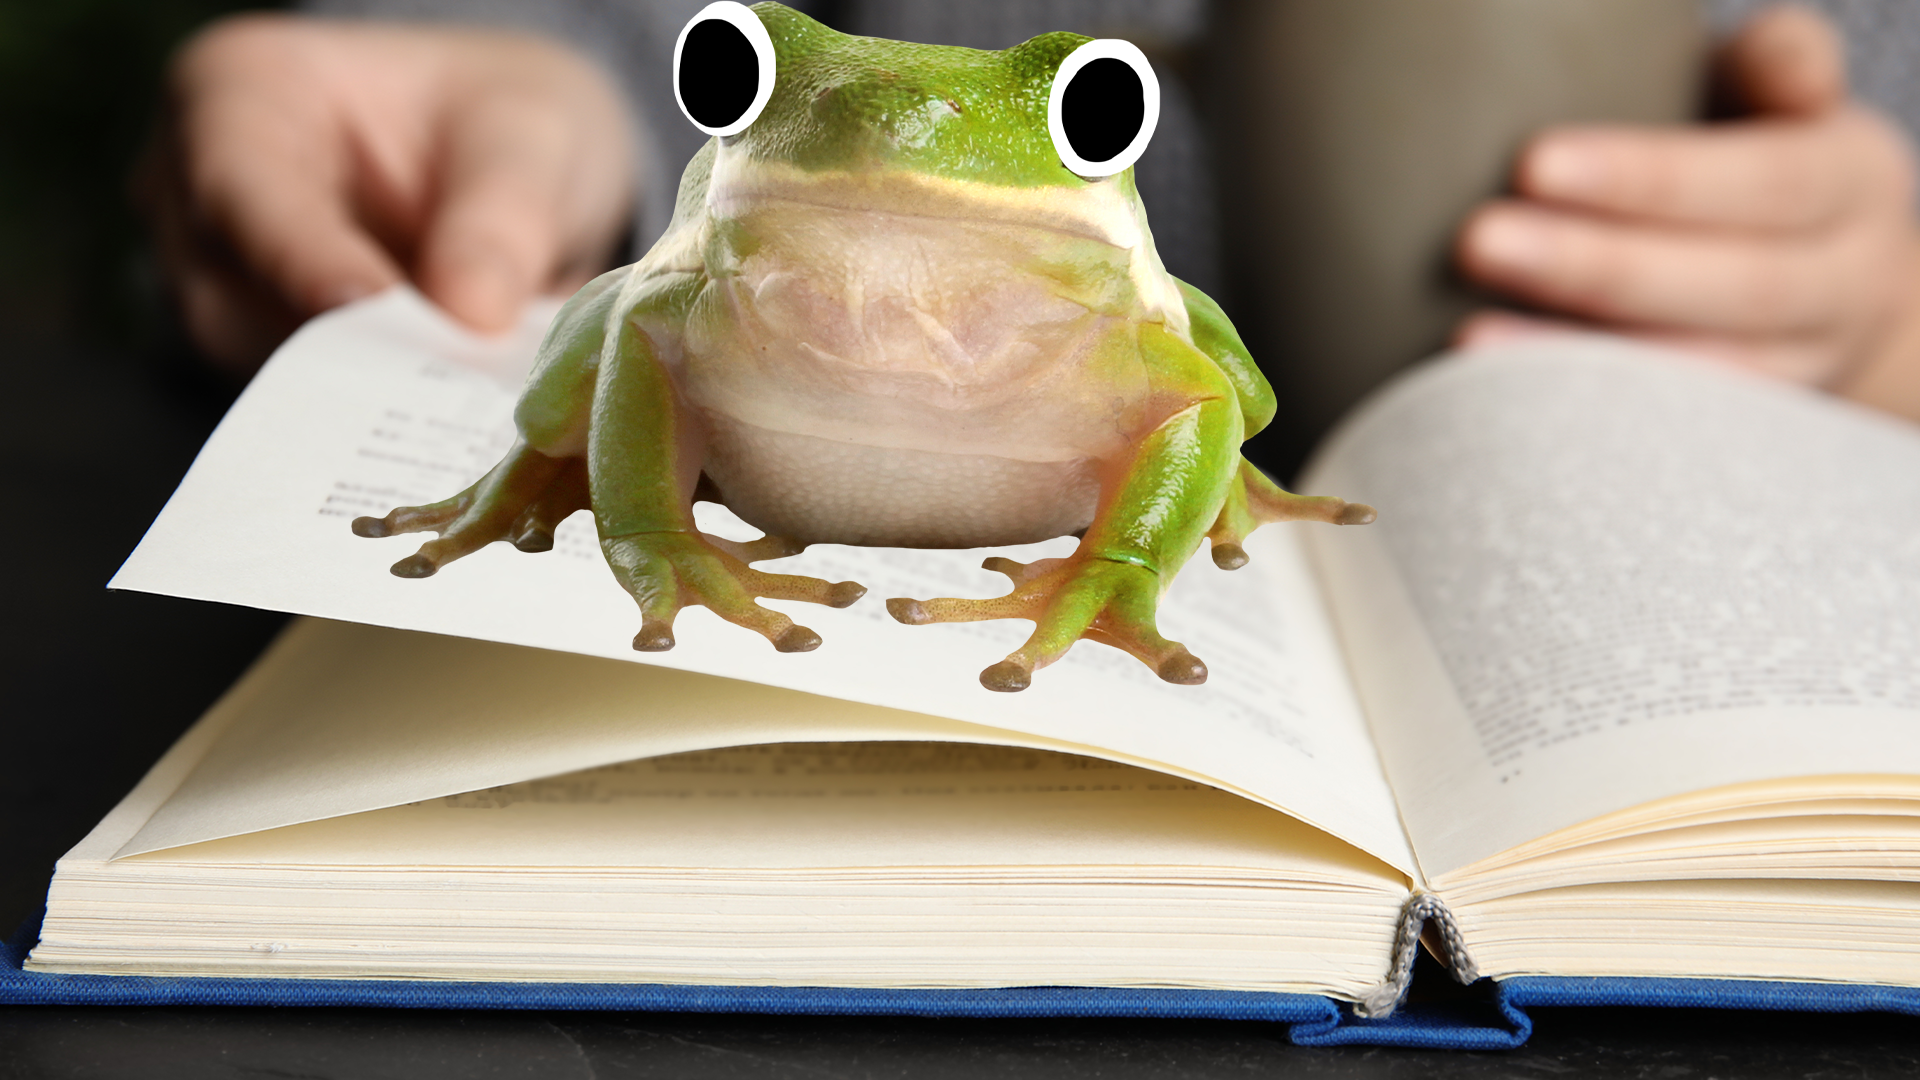 Cute lil frog on a book